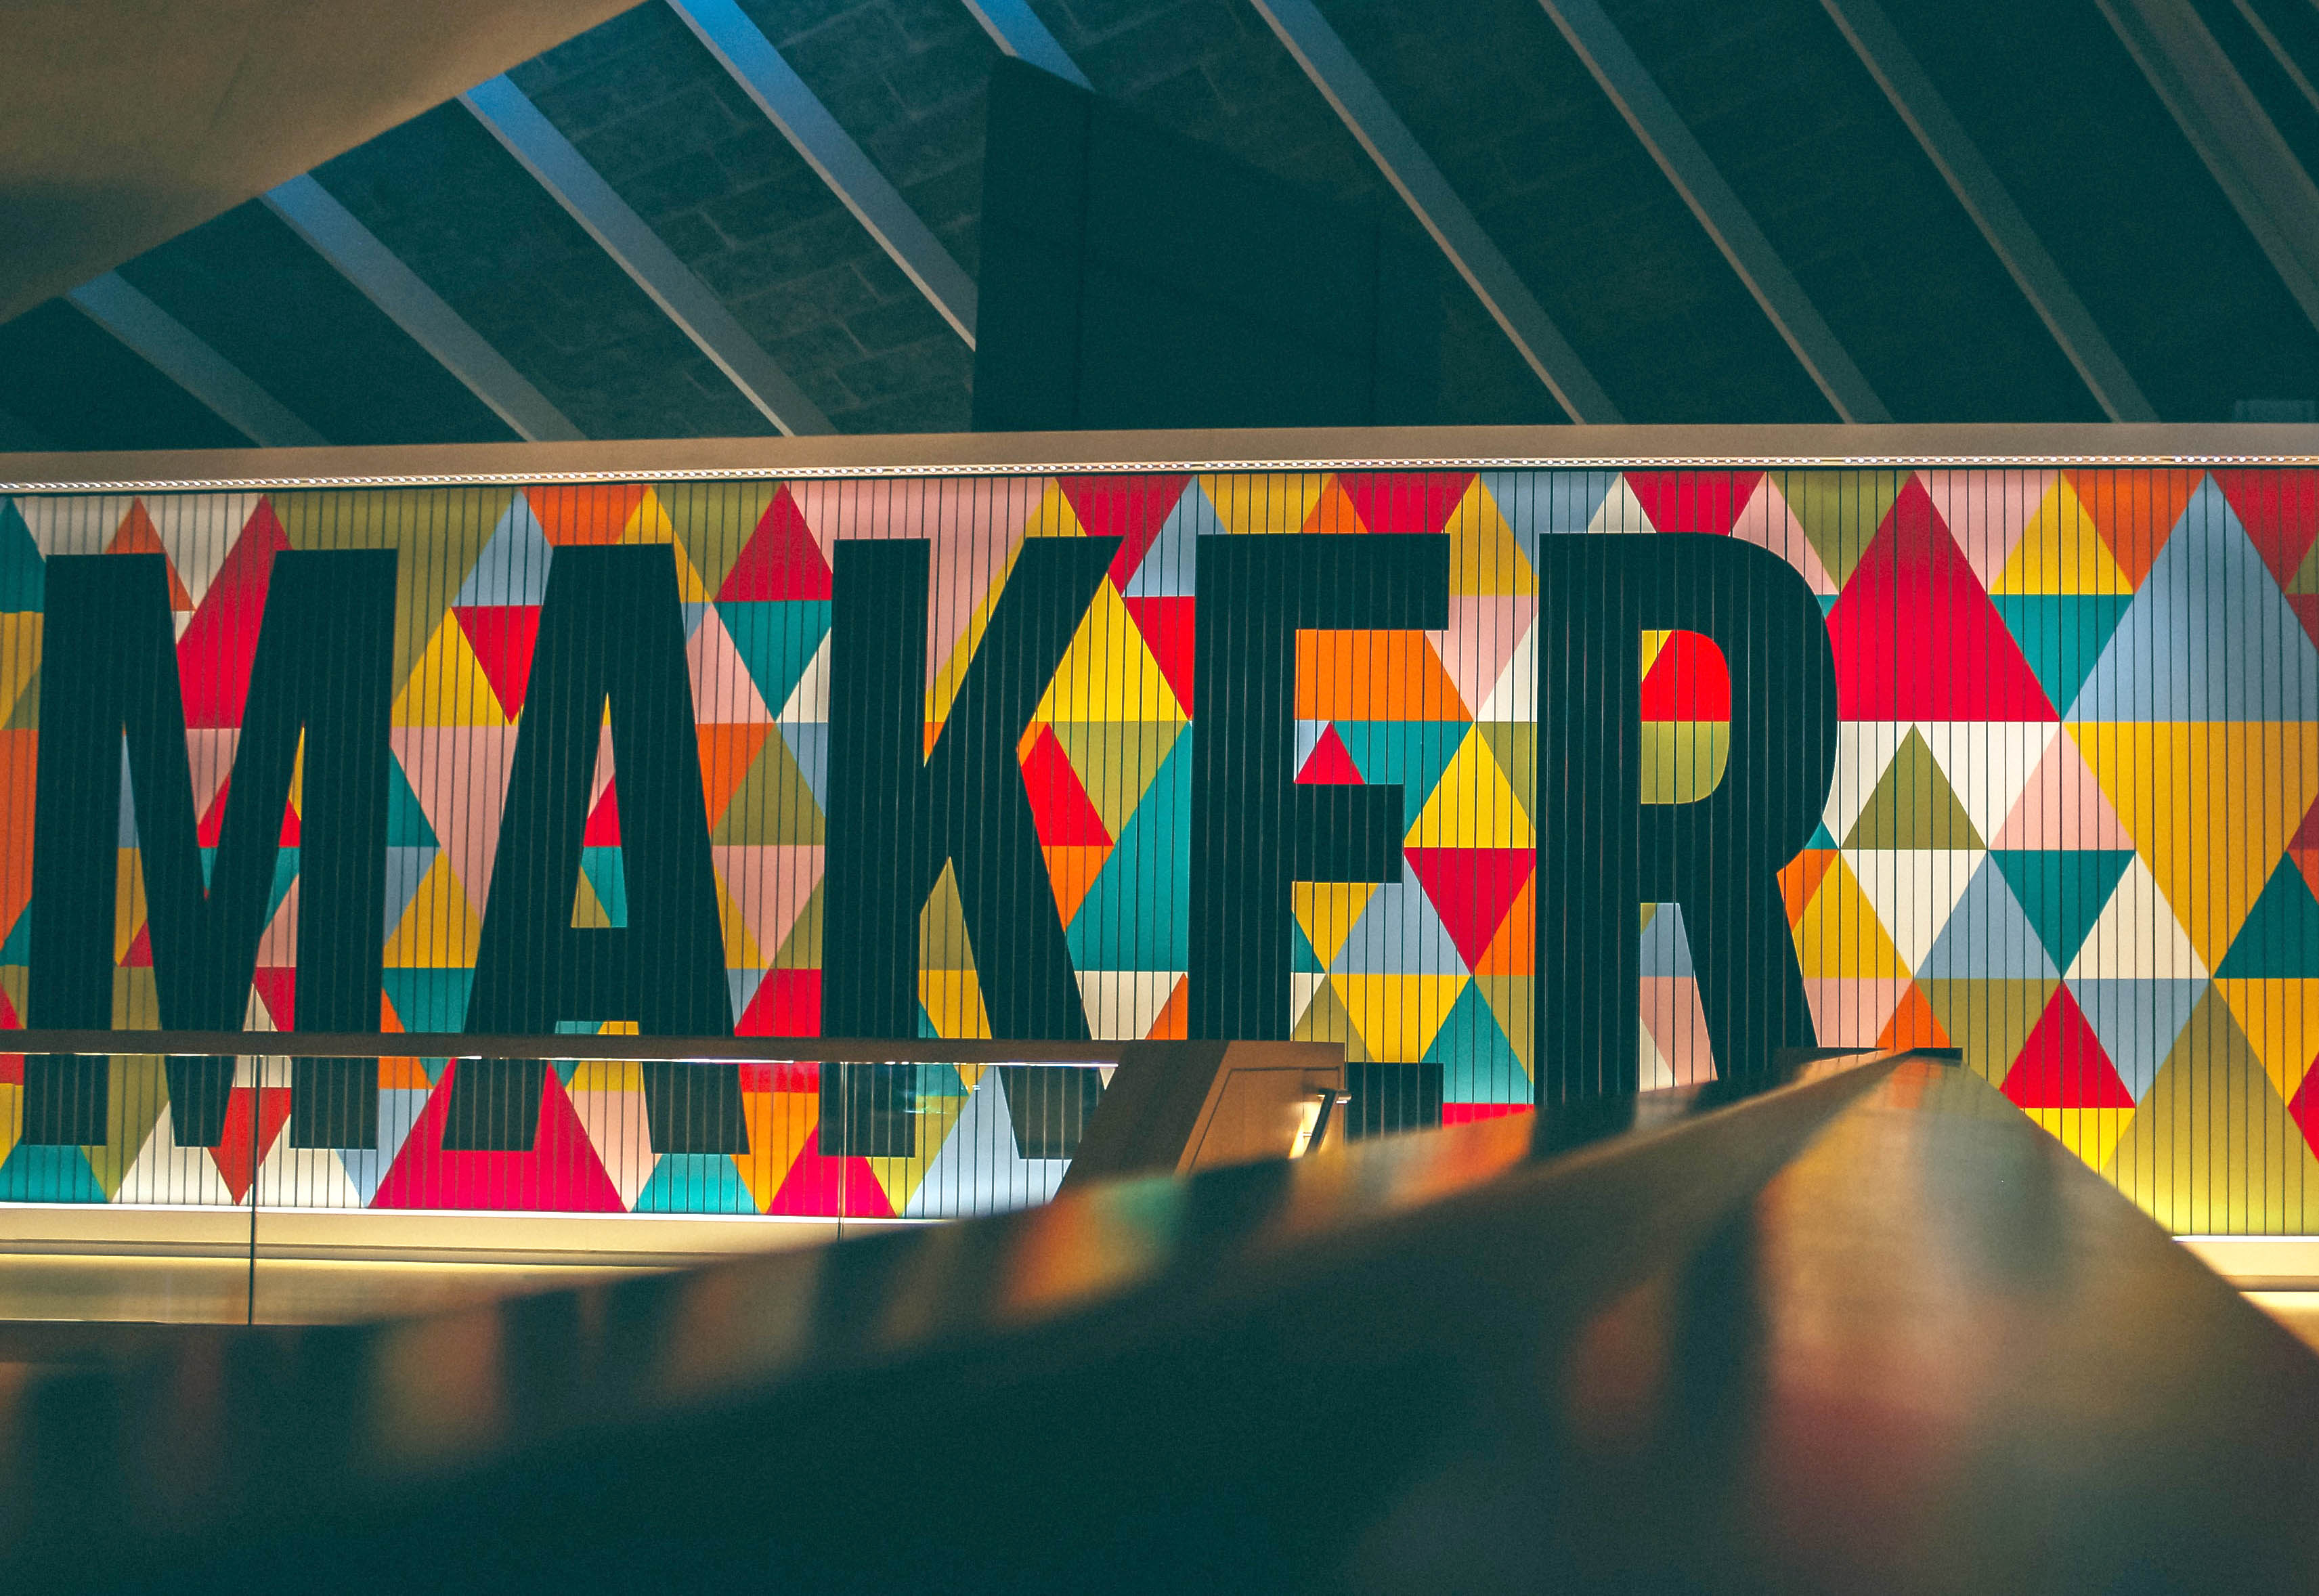 A virtual exhibit photo with the words "Maker"